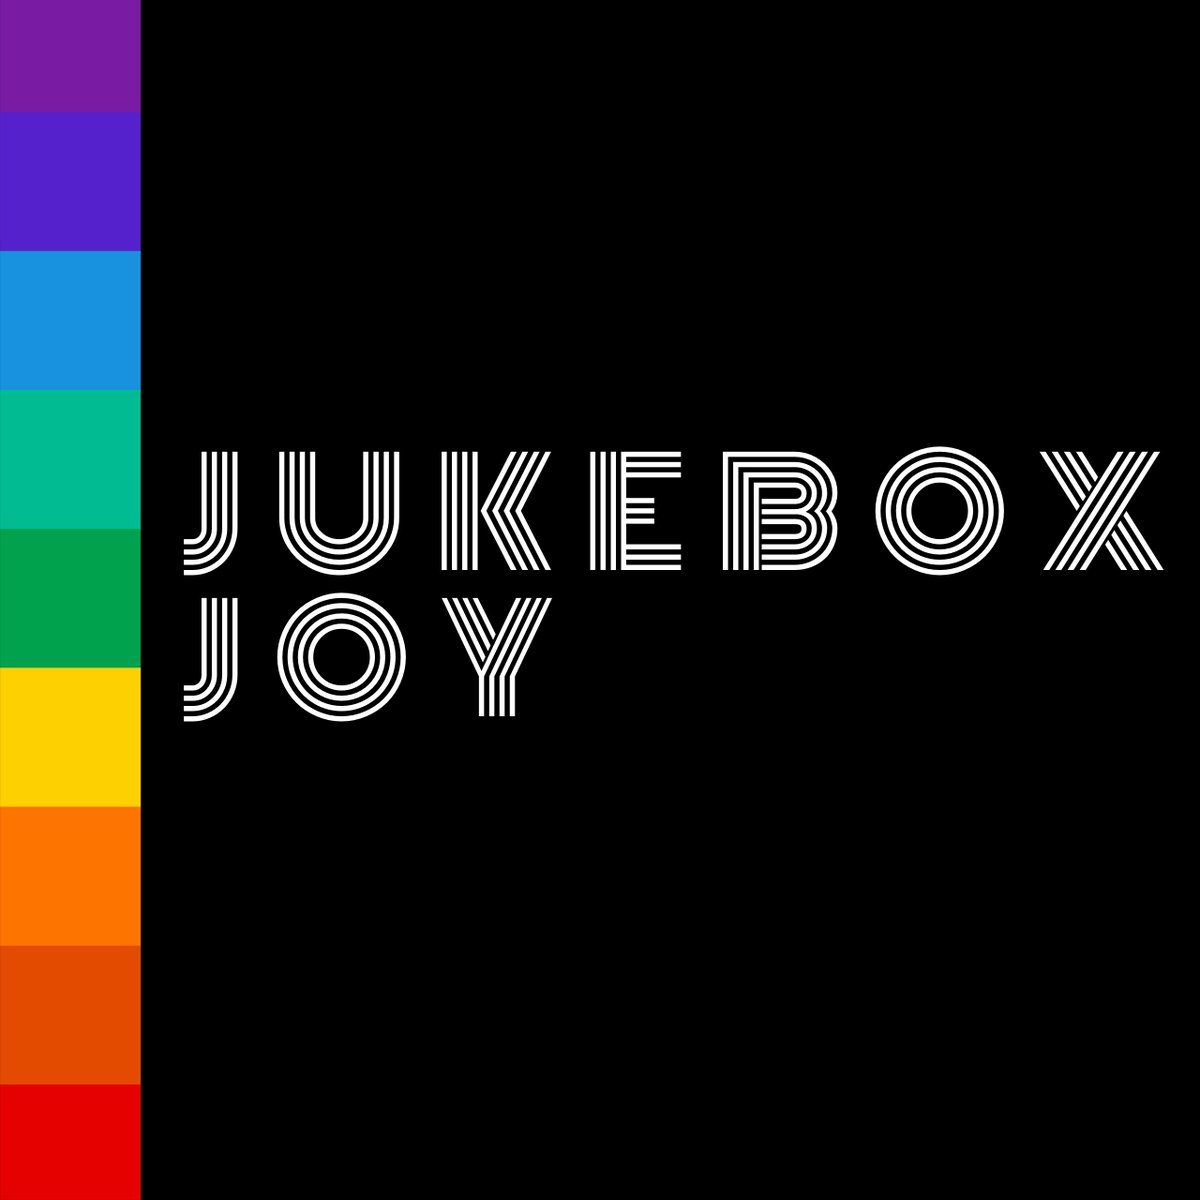 COMING UP at 8pm • #JukeboxJOY on @JOY949. LISTEN LIVE: 94.9 FM • DAB+ Digital Radio Melbourne • JOY.ORG.AU • @iHeartRadio • #JOY949 App. Where fresh new music meets throwback classics from the vault. Join me for a bunch of bangers! 🎙🌈🏳️‍🌈🎶🎧